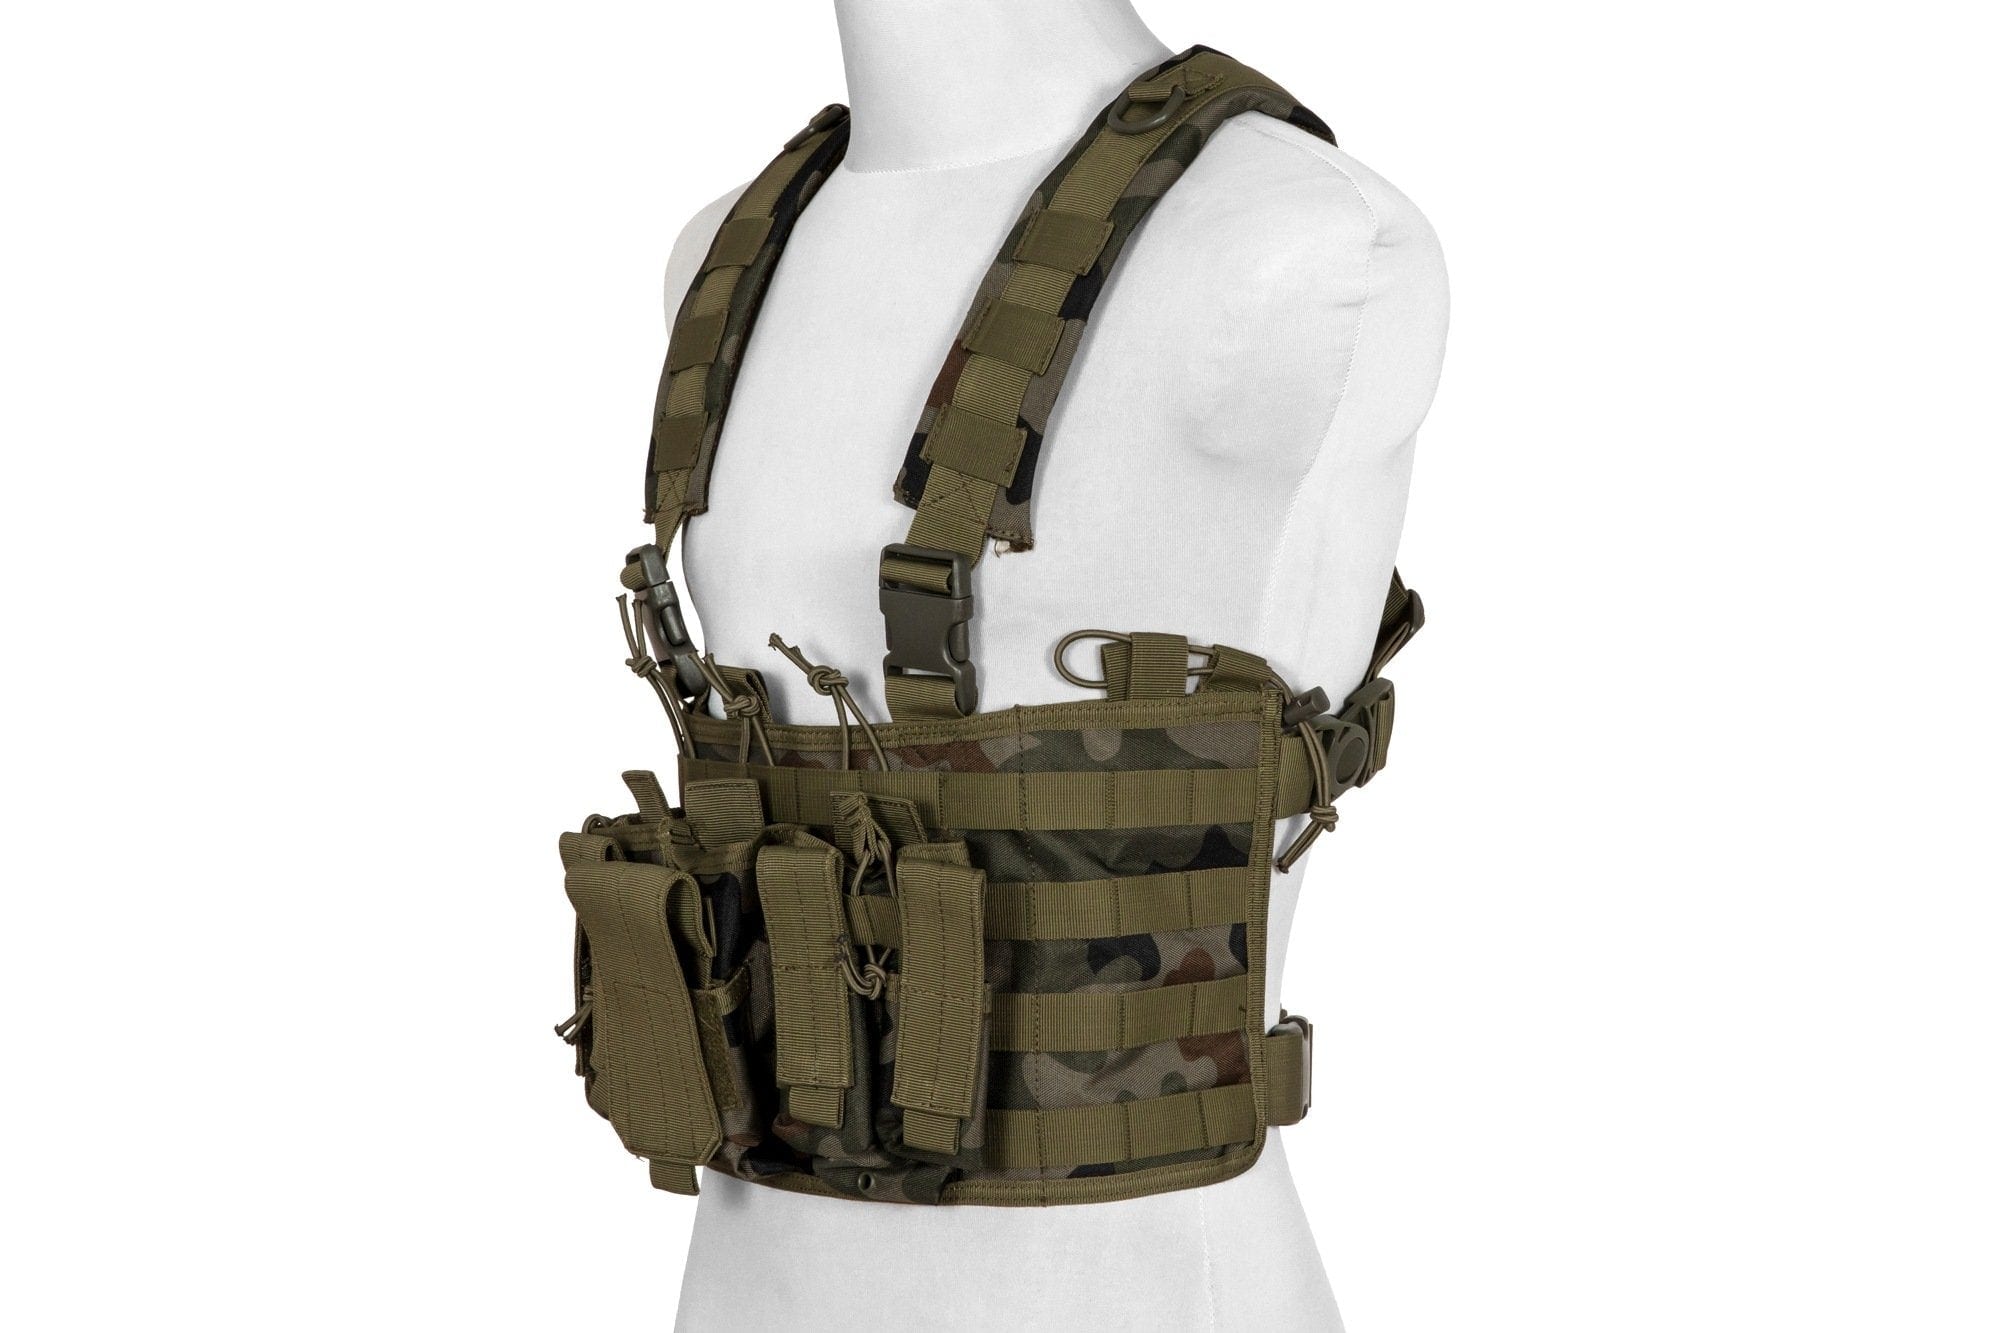 Airsoft Tactical Vest - Chest Rig